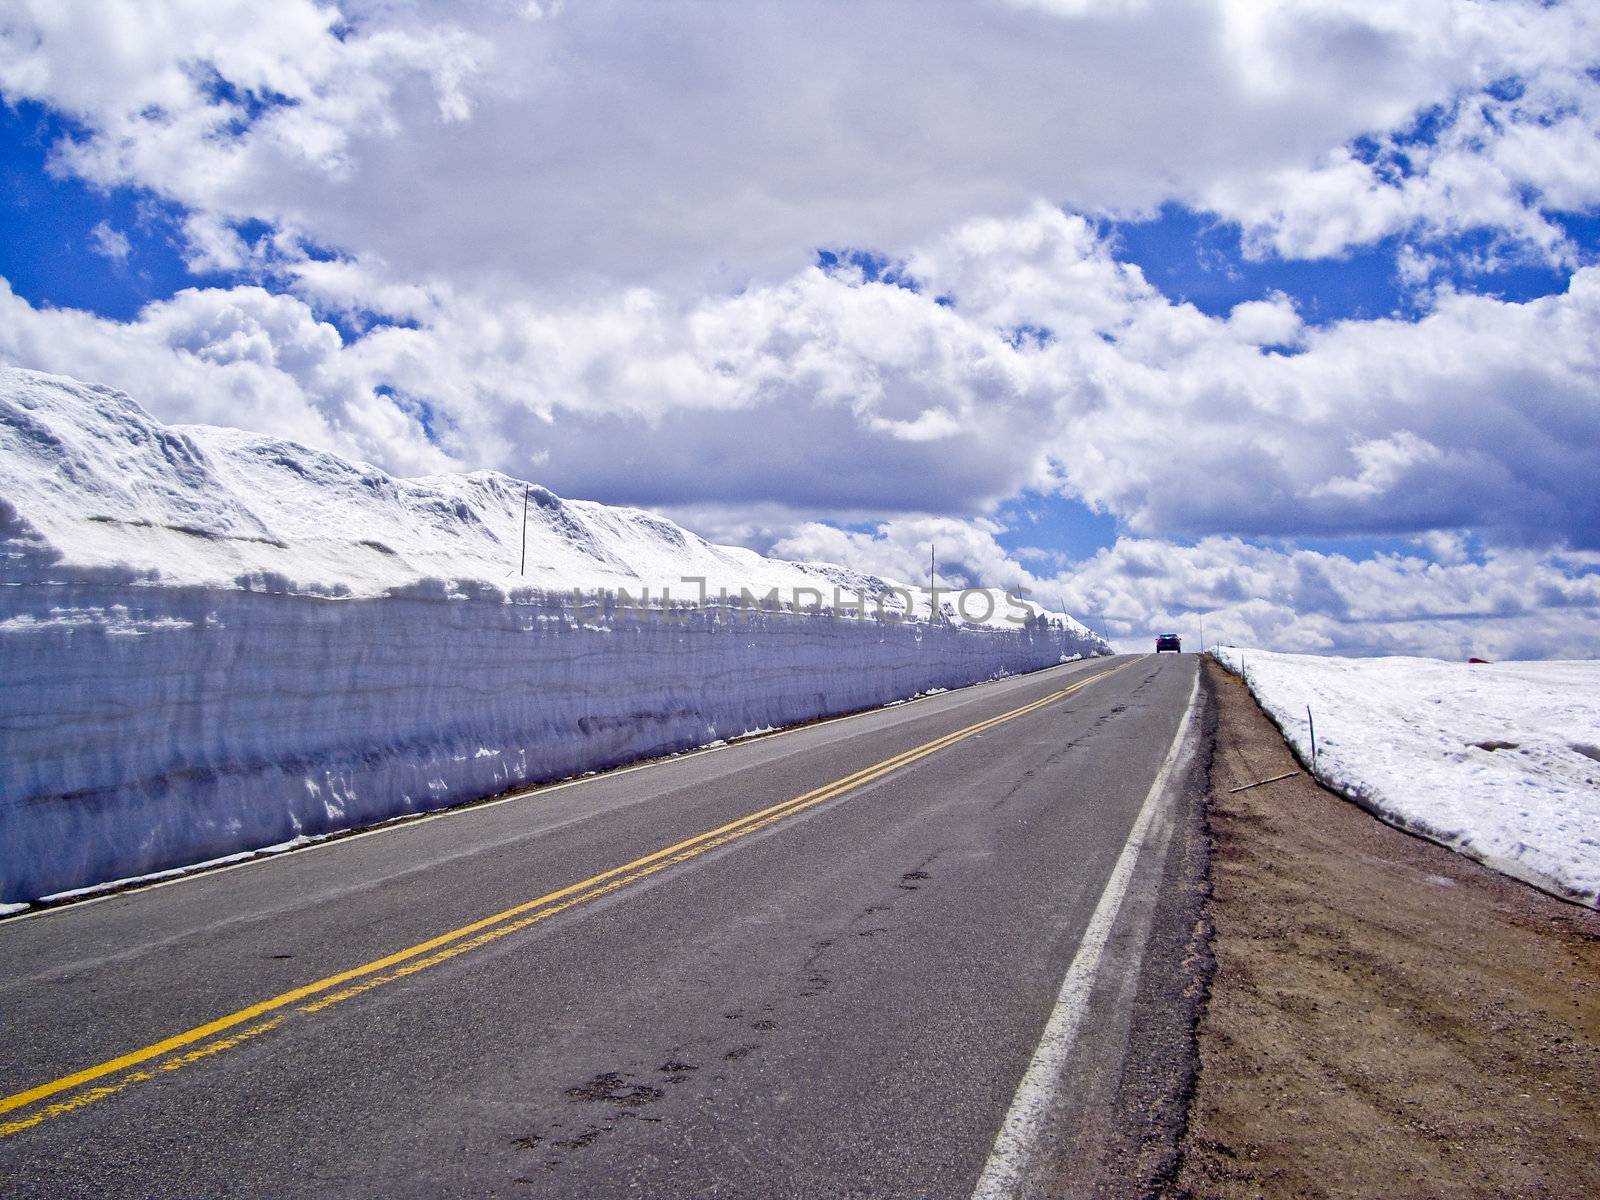 Beartooth Highway in Spring by emattil